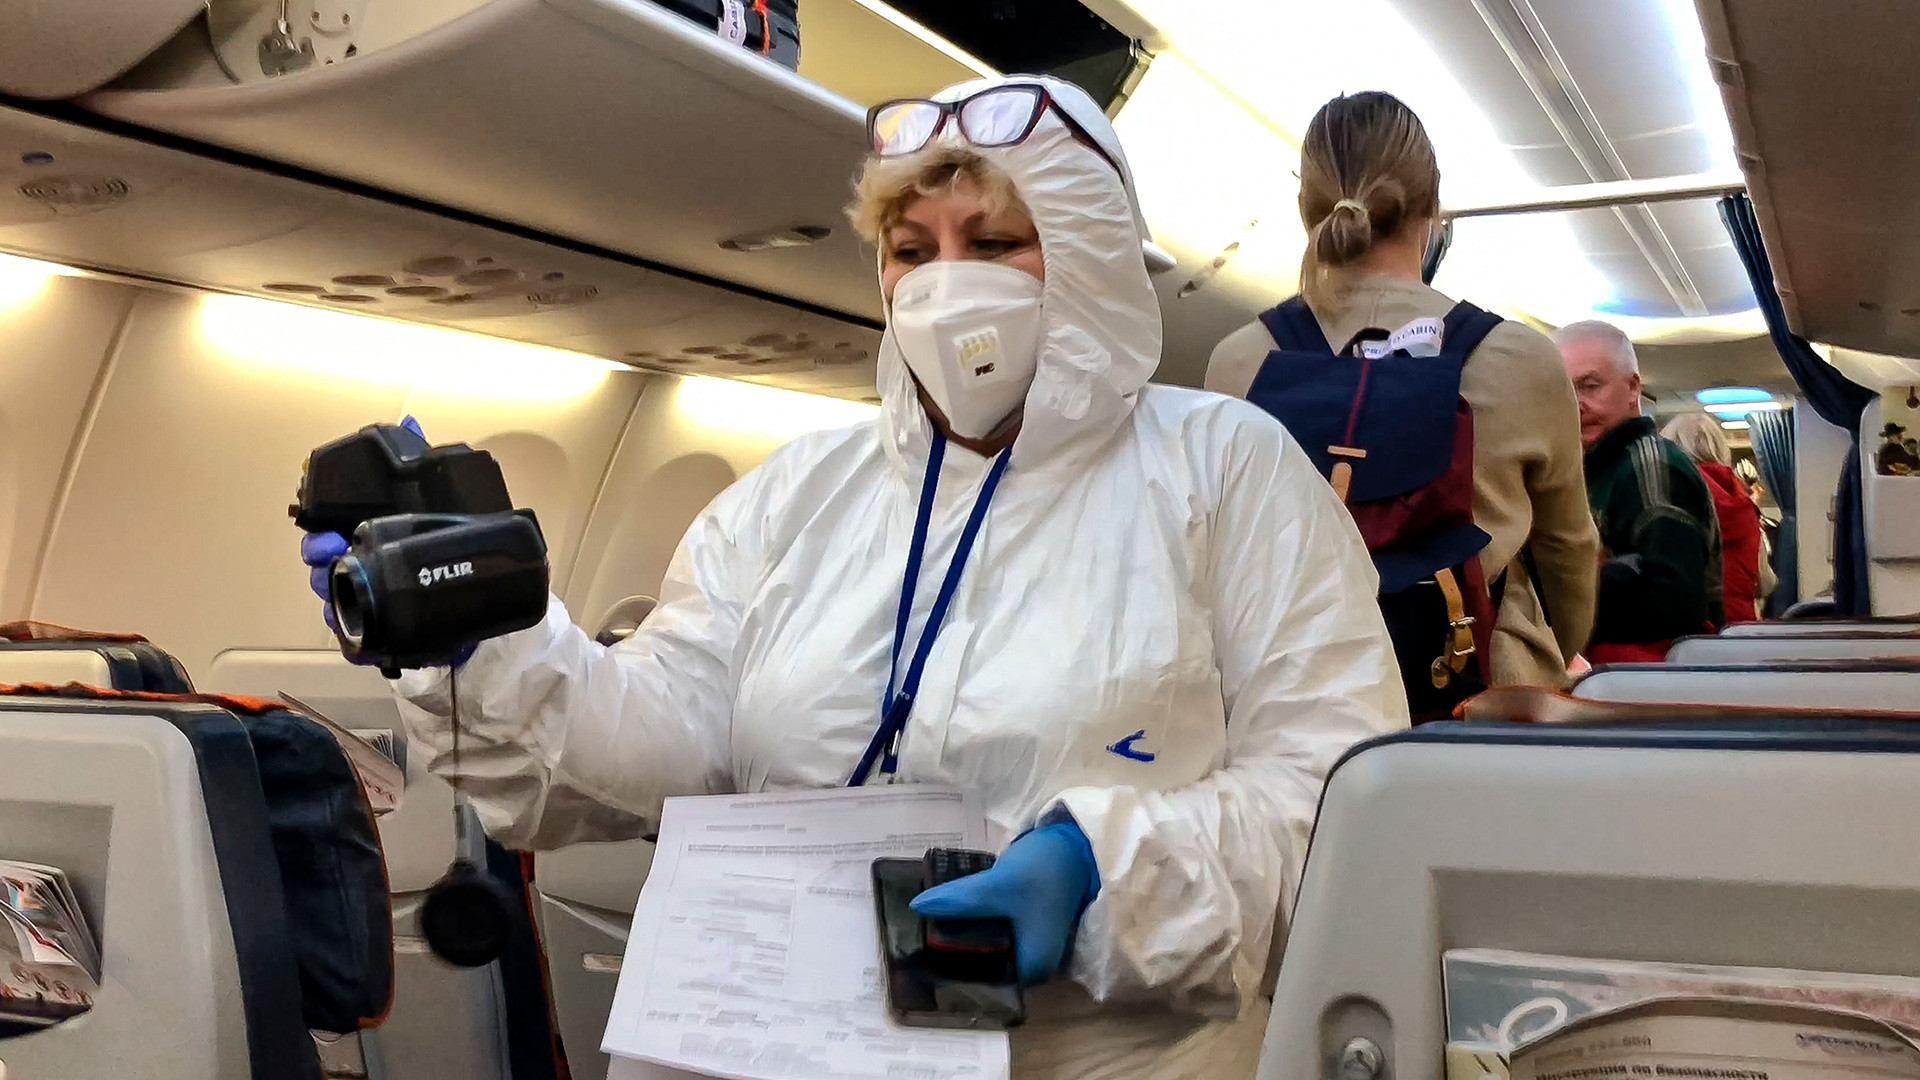 A Russian medical expert checks passengers arriving from Italy inside the plane at Sheremetyevo airport, Moscow, March 8, 2020. 